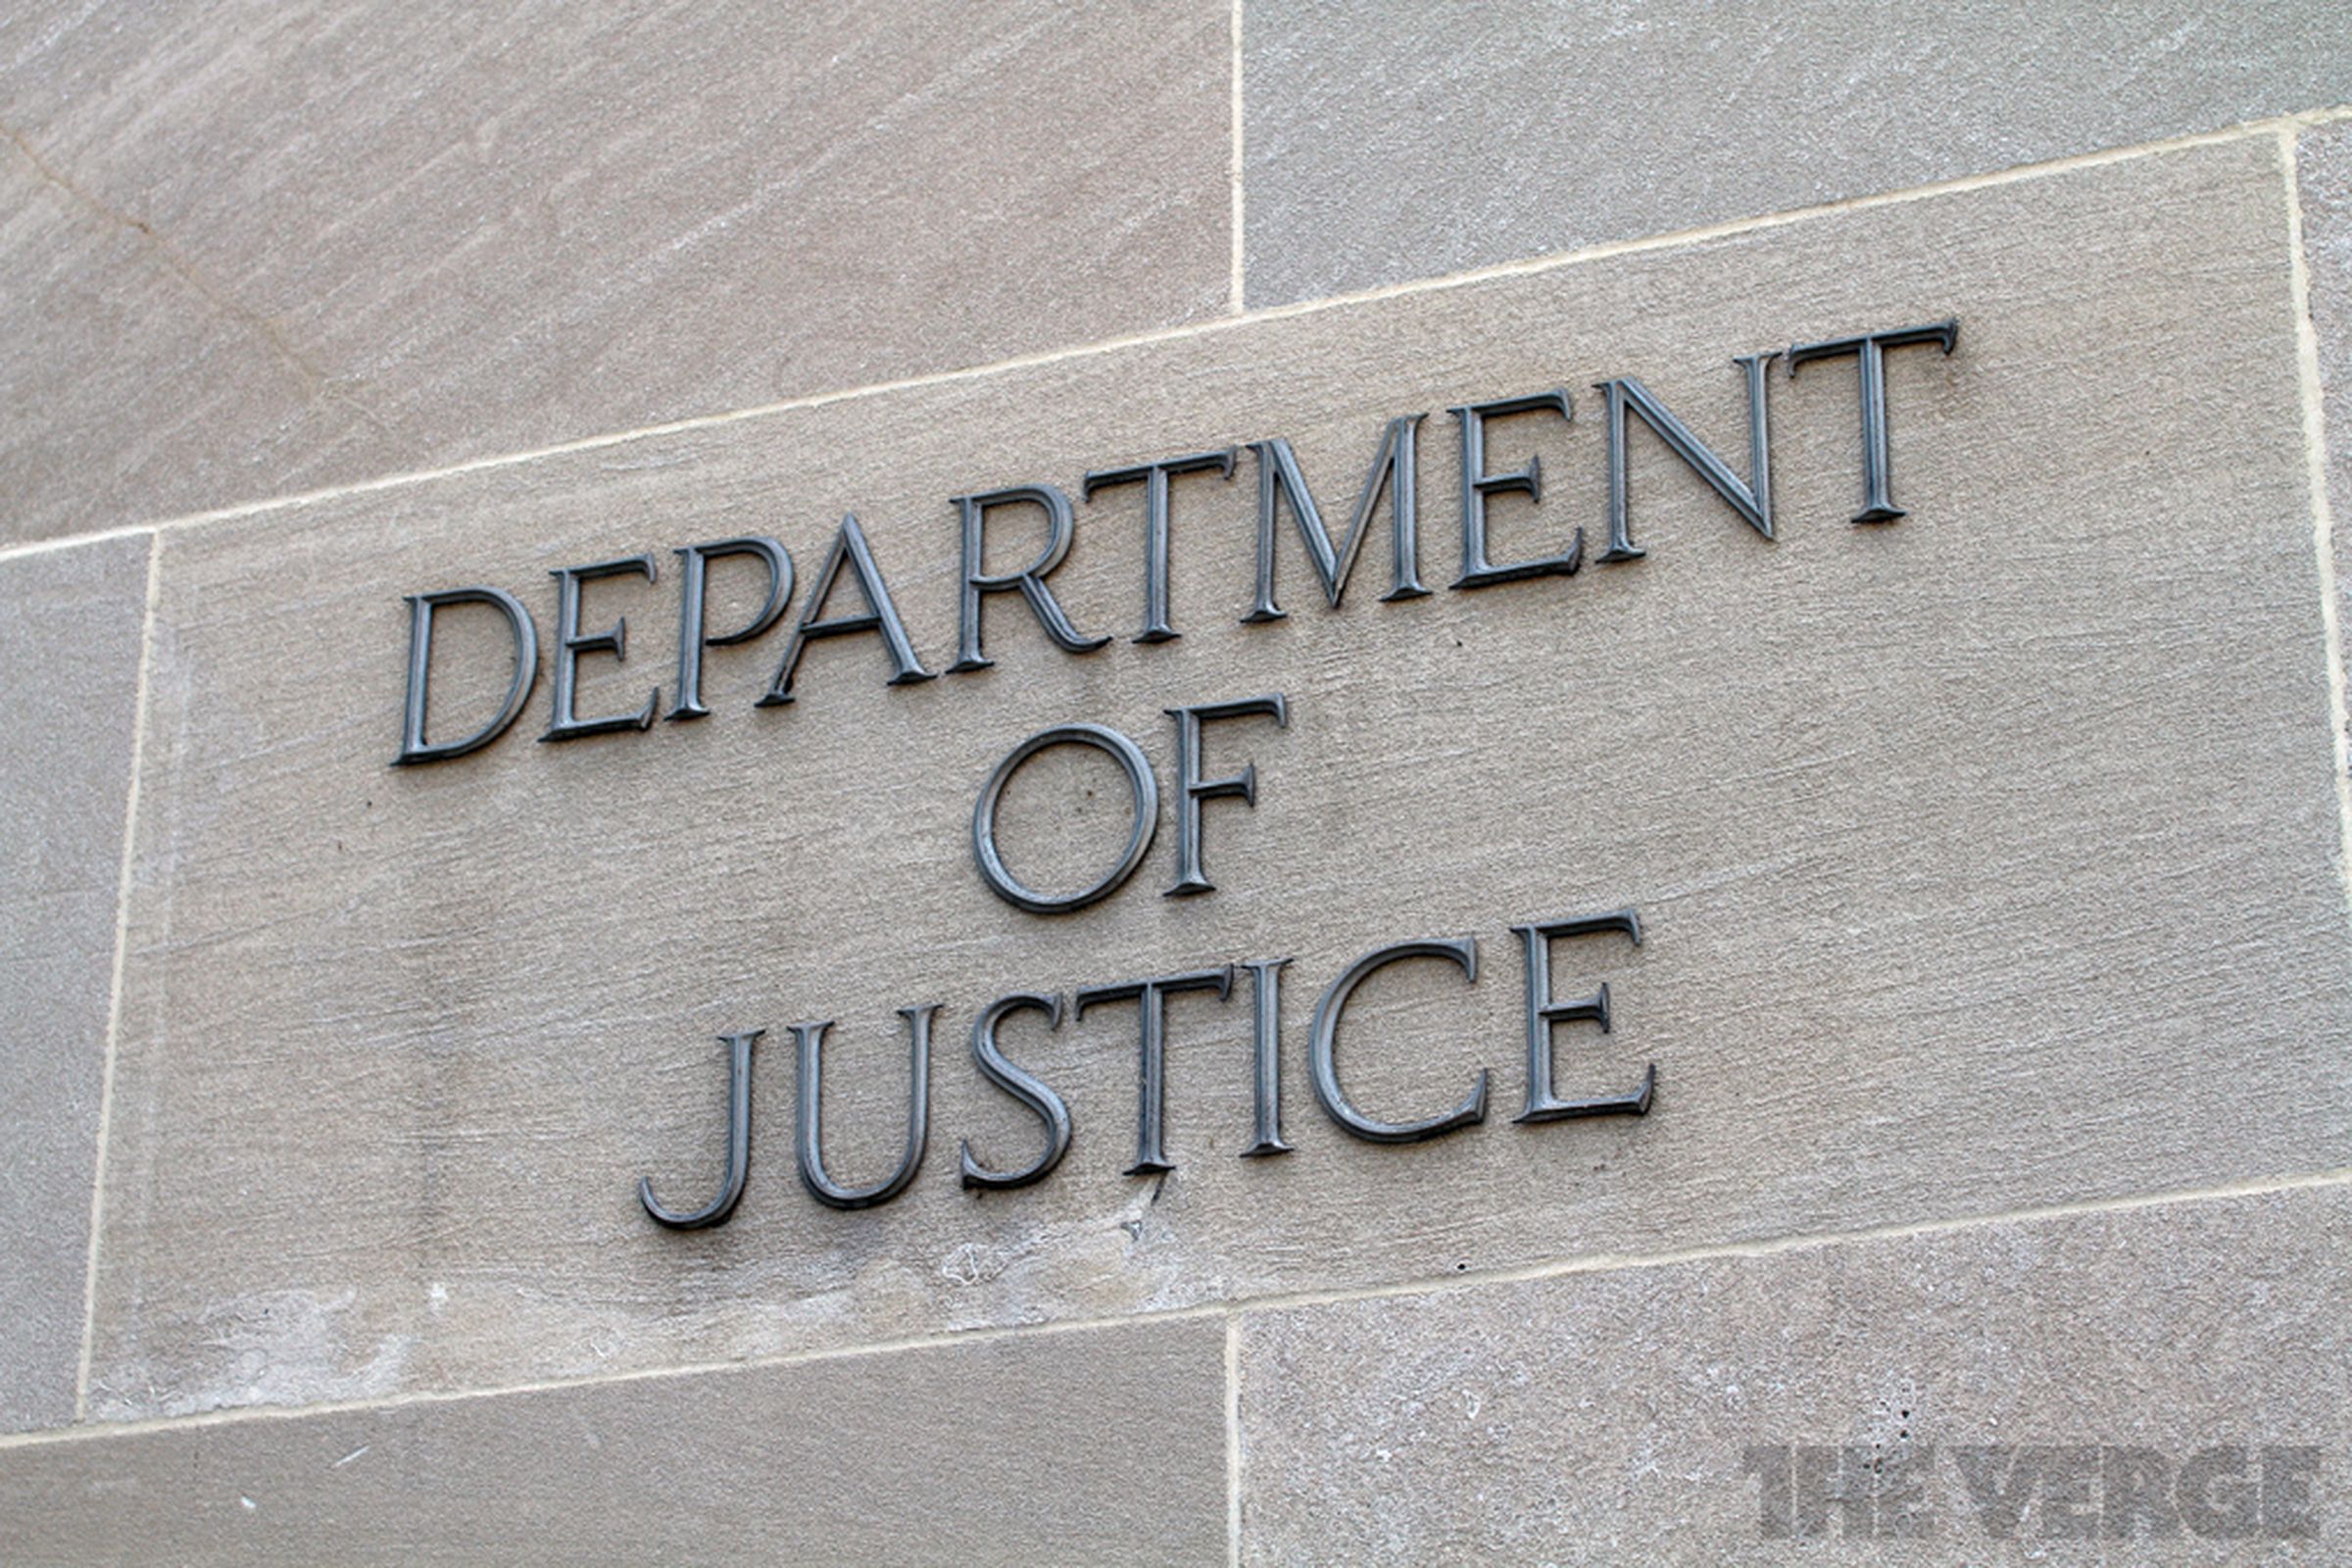 An image showing the Department of Justice lettering